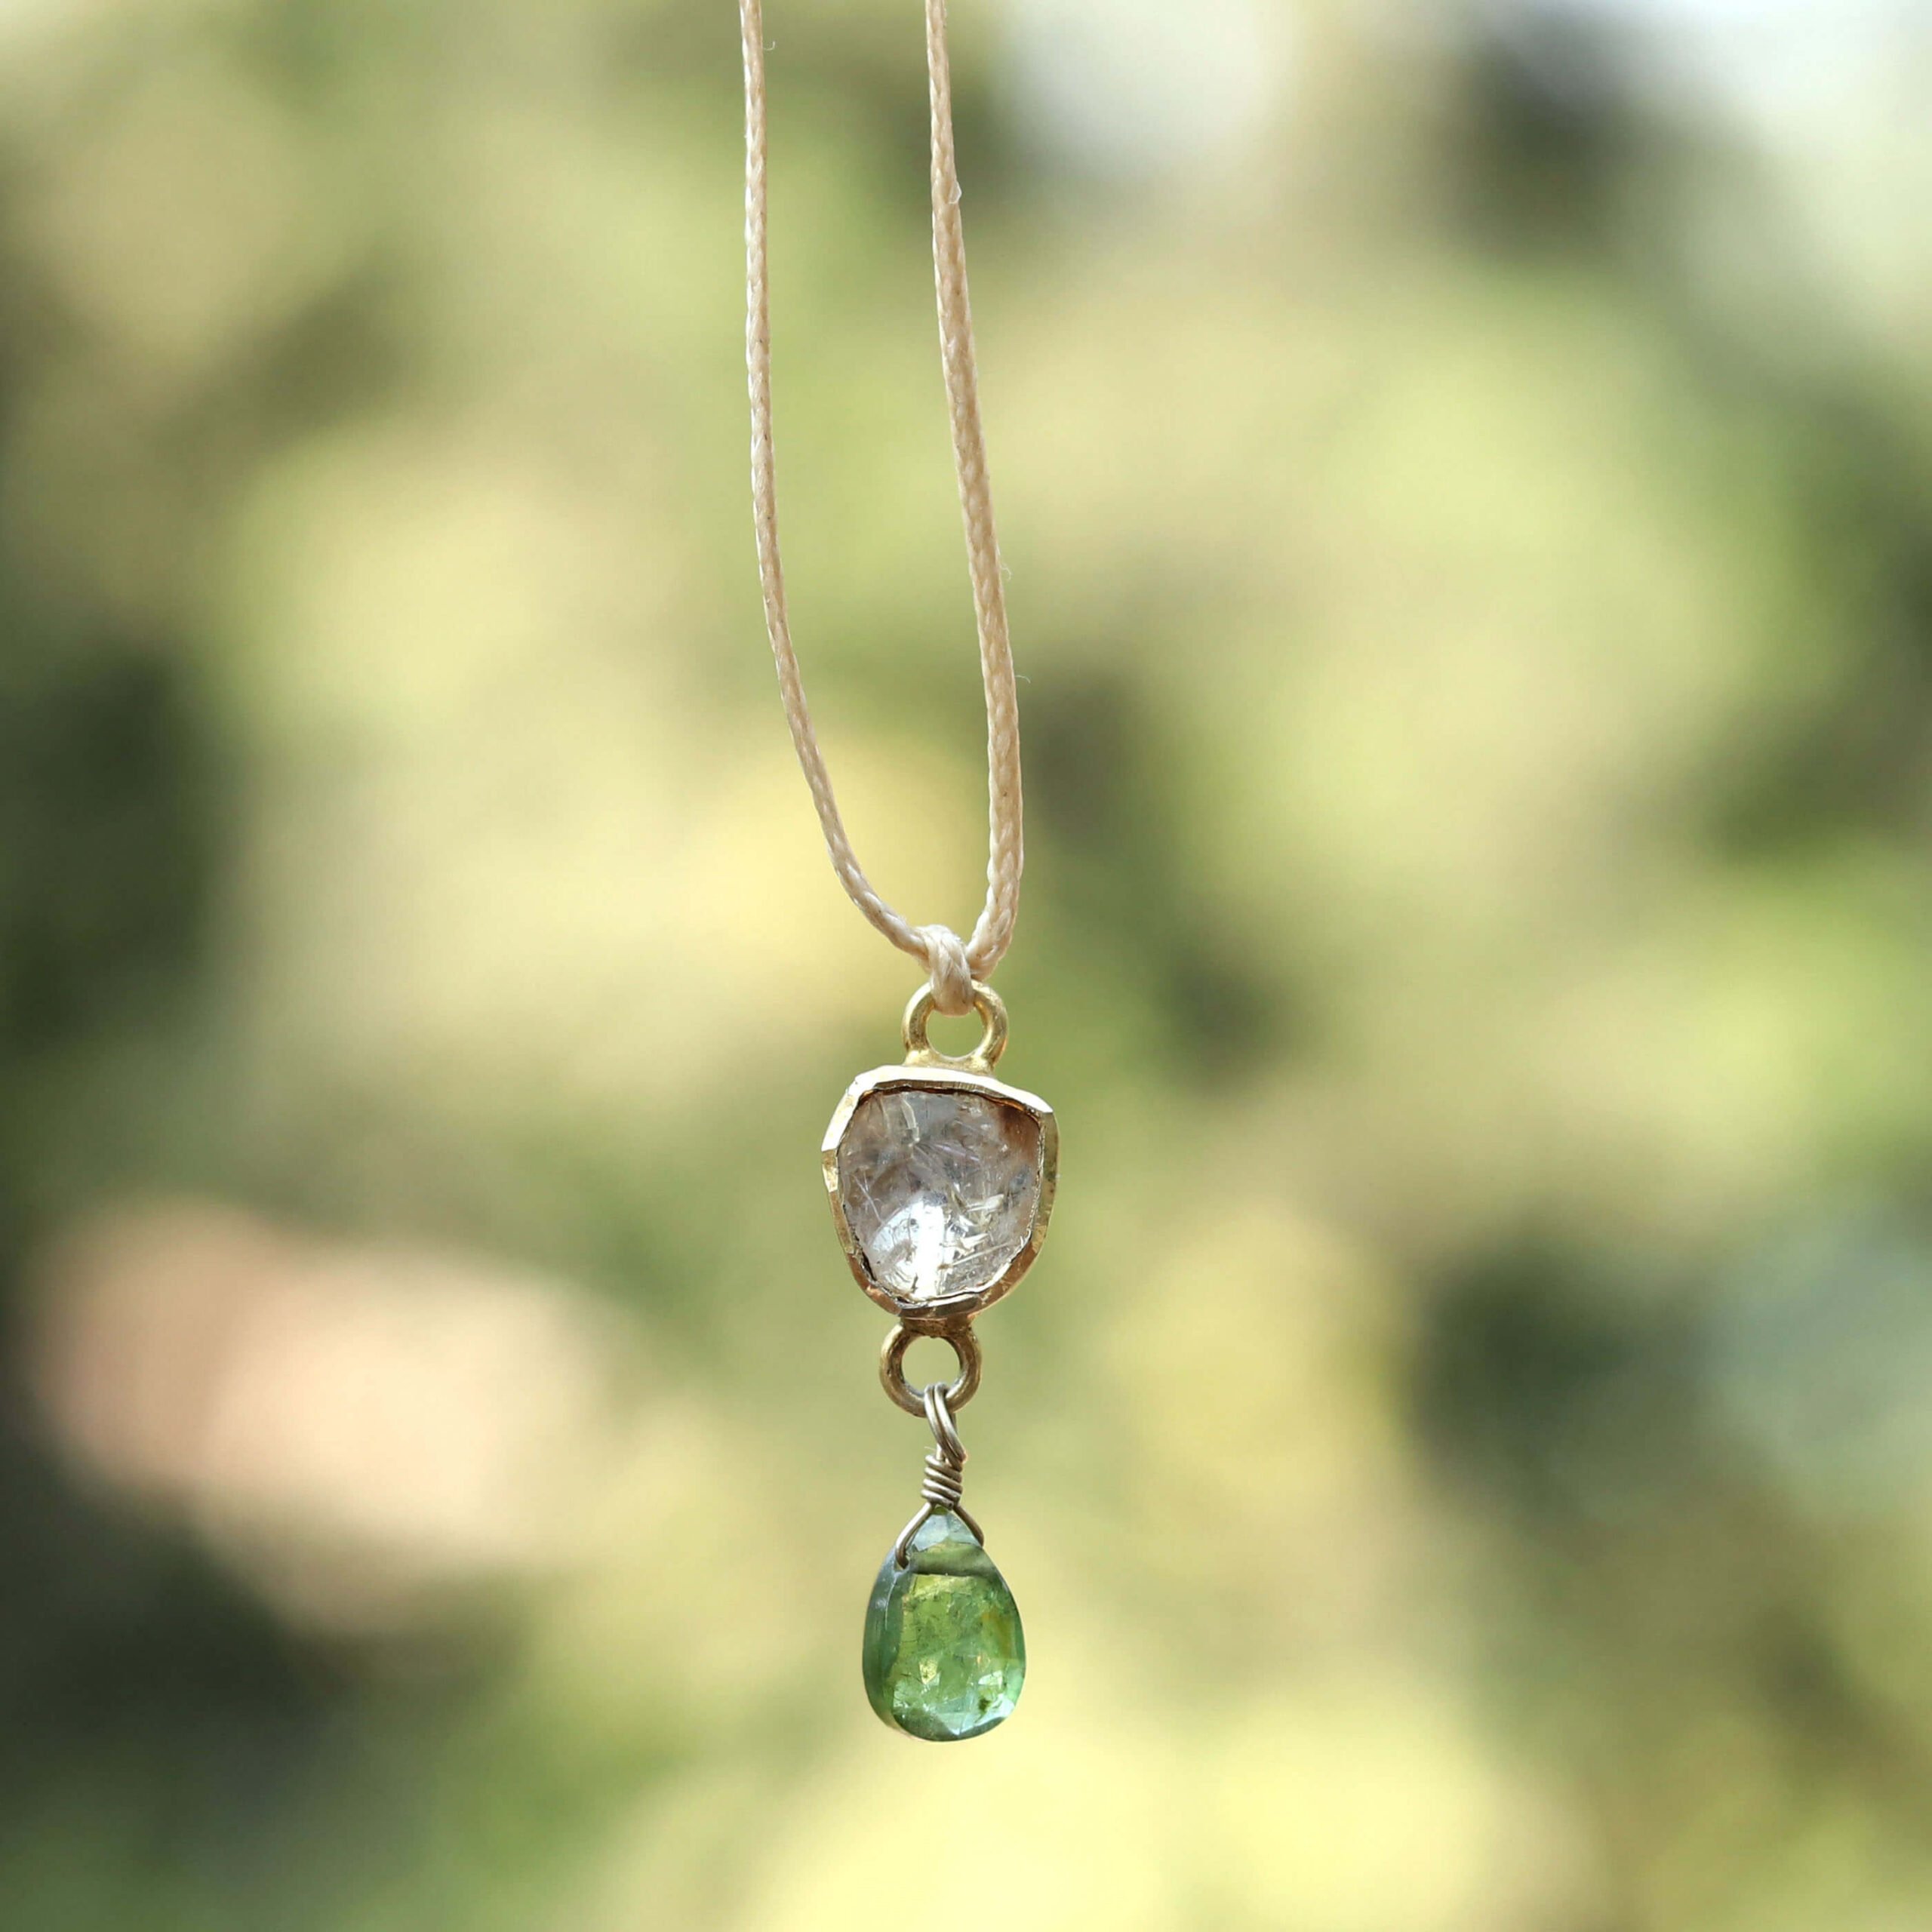 Handmade Layered Necklaces, Green Rosary, Green Stone Necklace, Chain  Necklace, Simple Necklace, Gift for Her, Made From Sterling Silver 925 -  Etsy